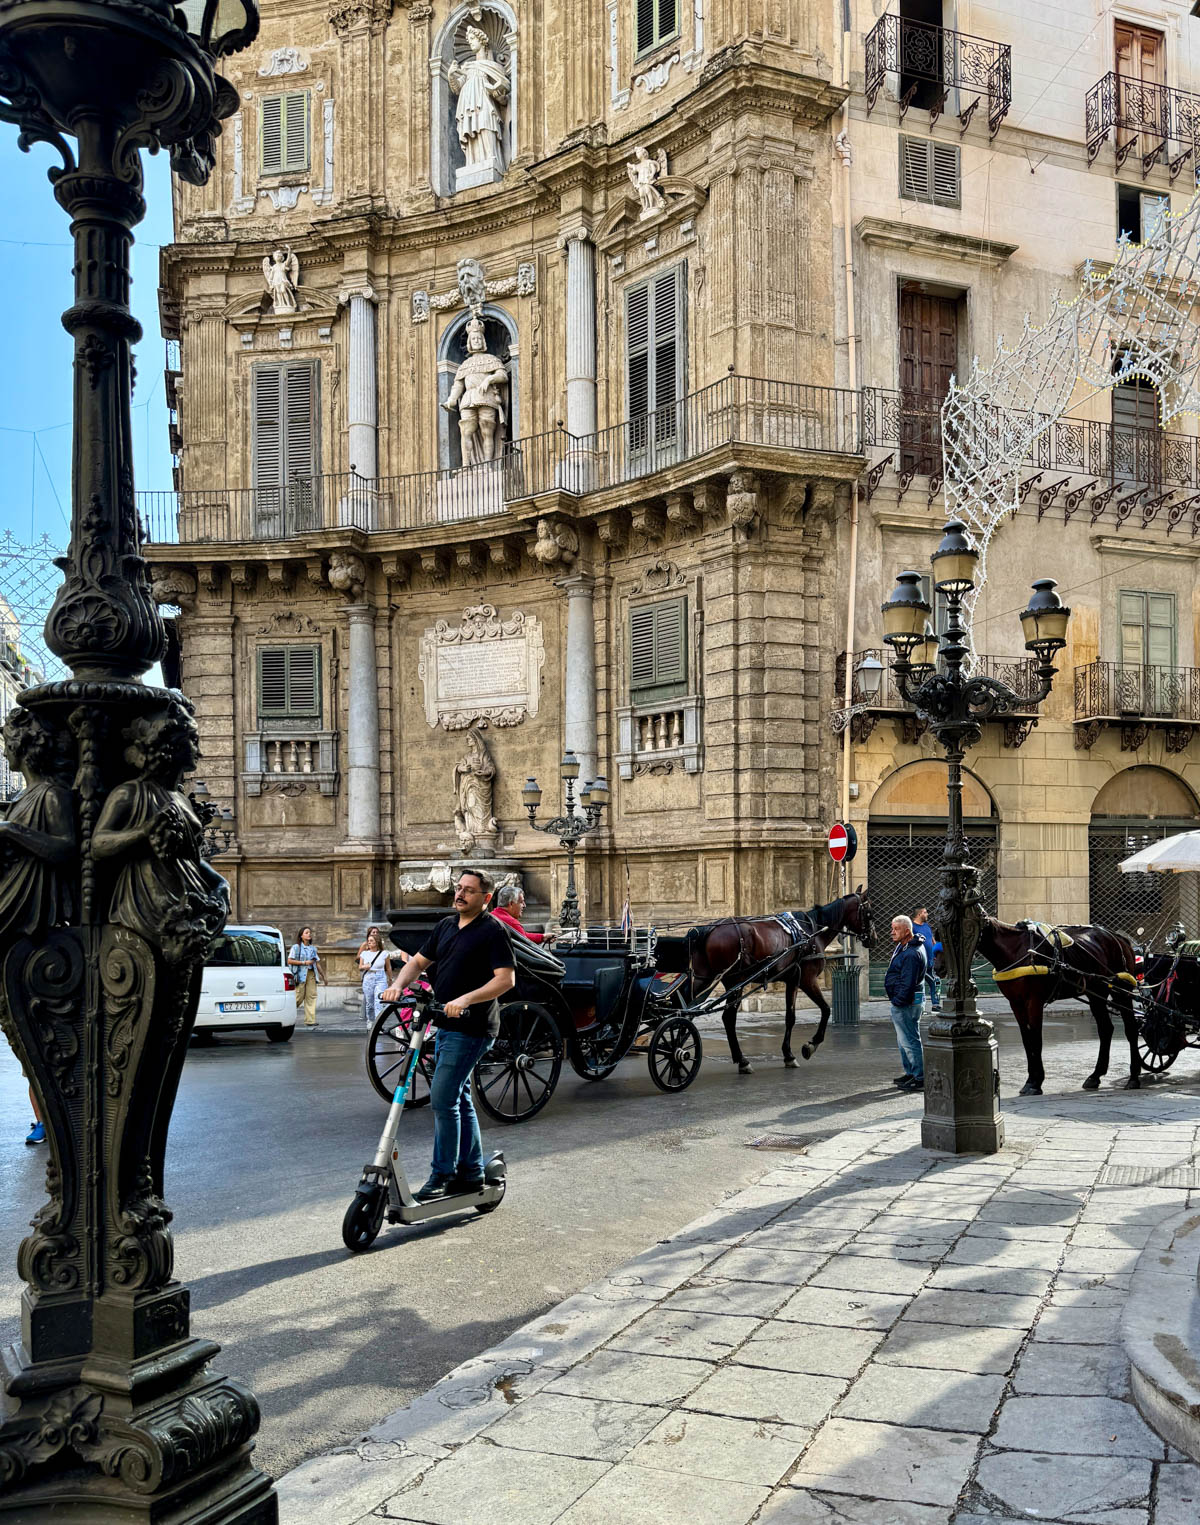 Horse and carriage in front of building with many on segway on road.